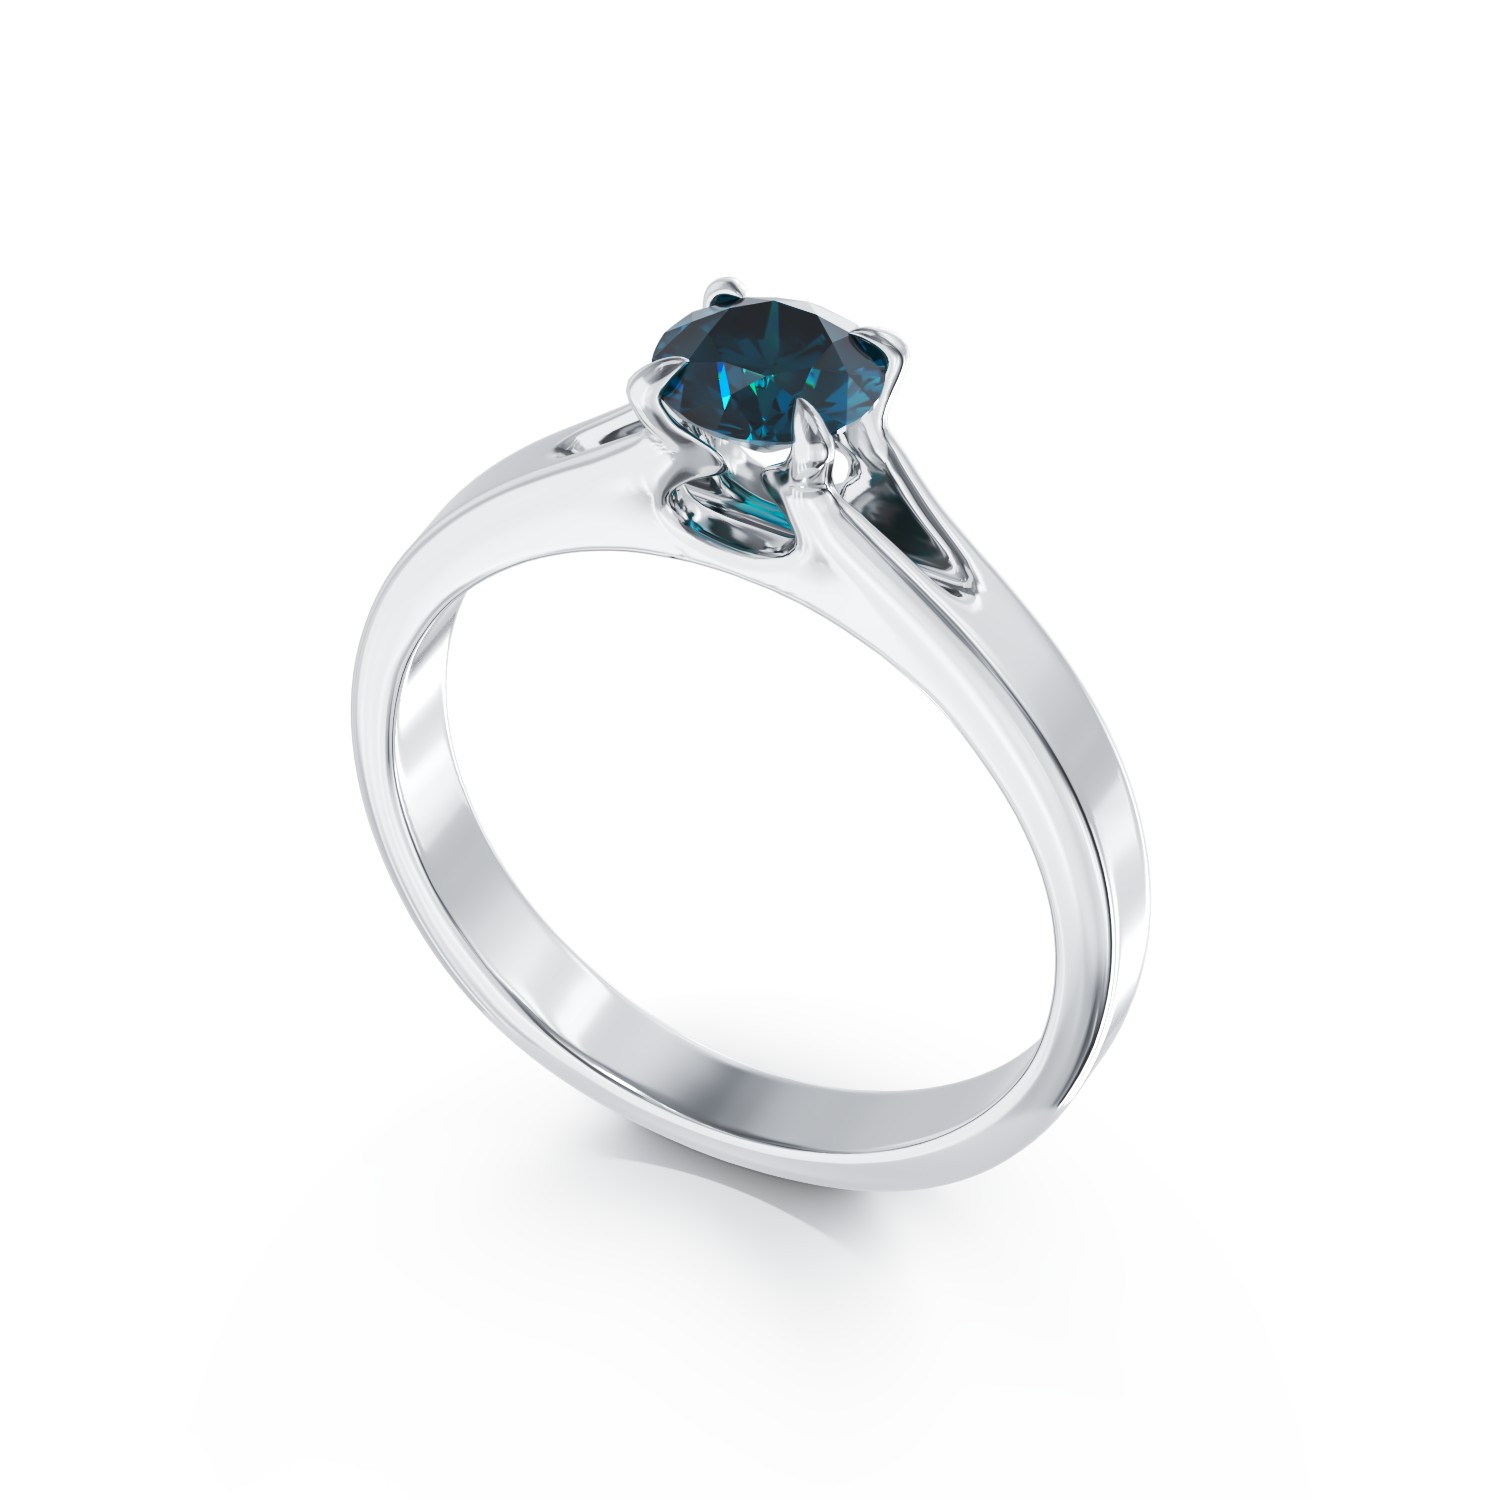 18K white gold engagement ring with blue diamond of 0.55ct